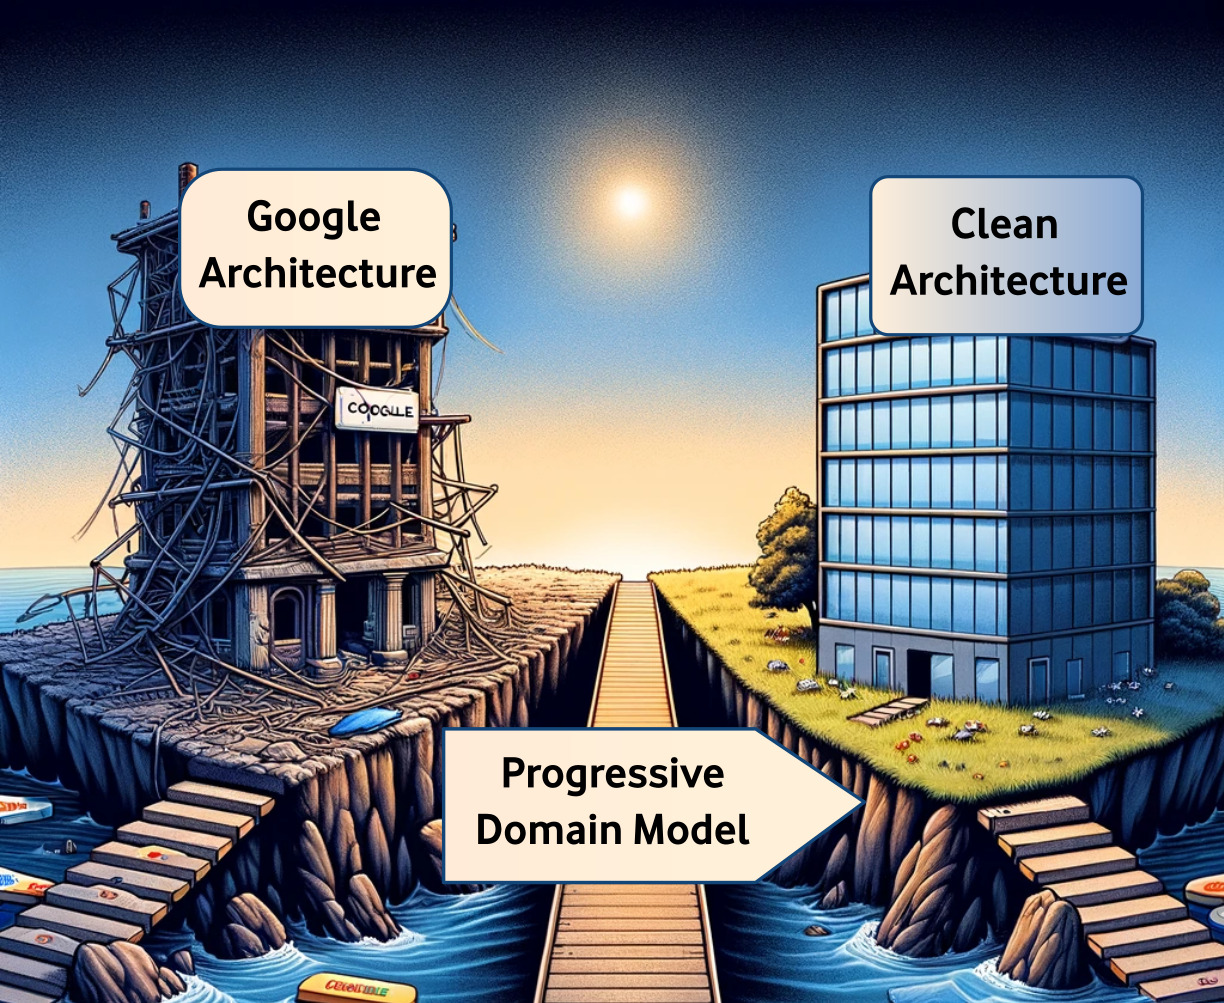 image of one-way bridge that crosses from left to right, prominently labeled "Progressive Domain Model" in bold. The bridge connects island one with island two. At the left, island one has an old-fashioned, crumbling building, clearly labeled as "Google Architecture". At the right, island two is a modern, nicely placed and solid building clearly labeled as "Clean Architecture".